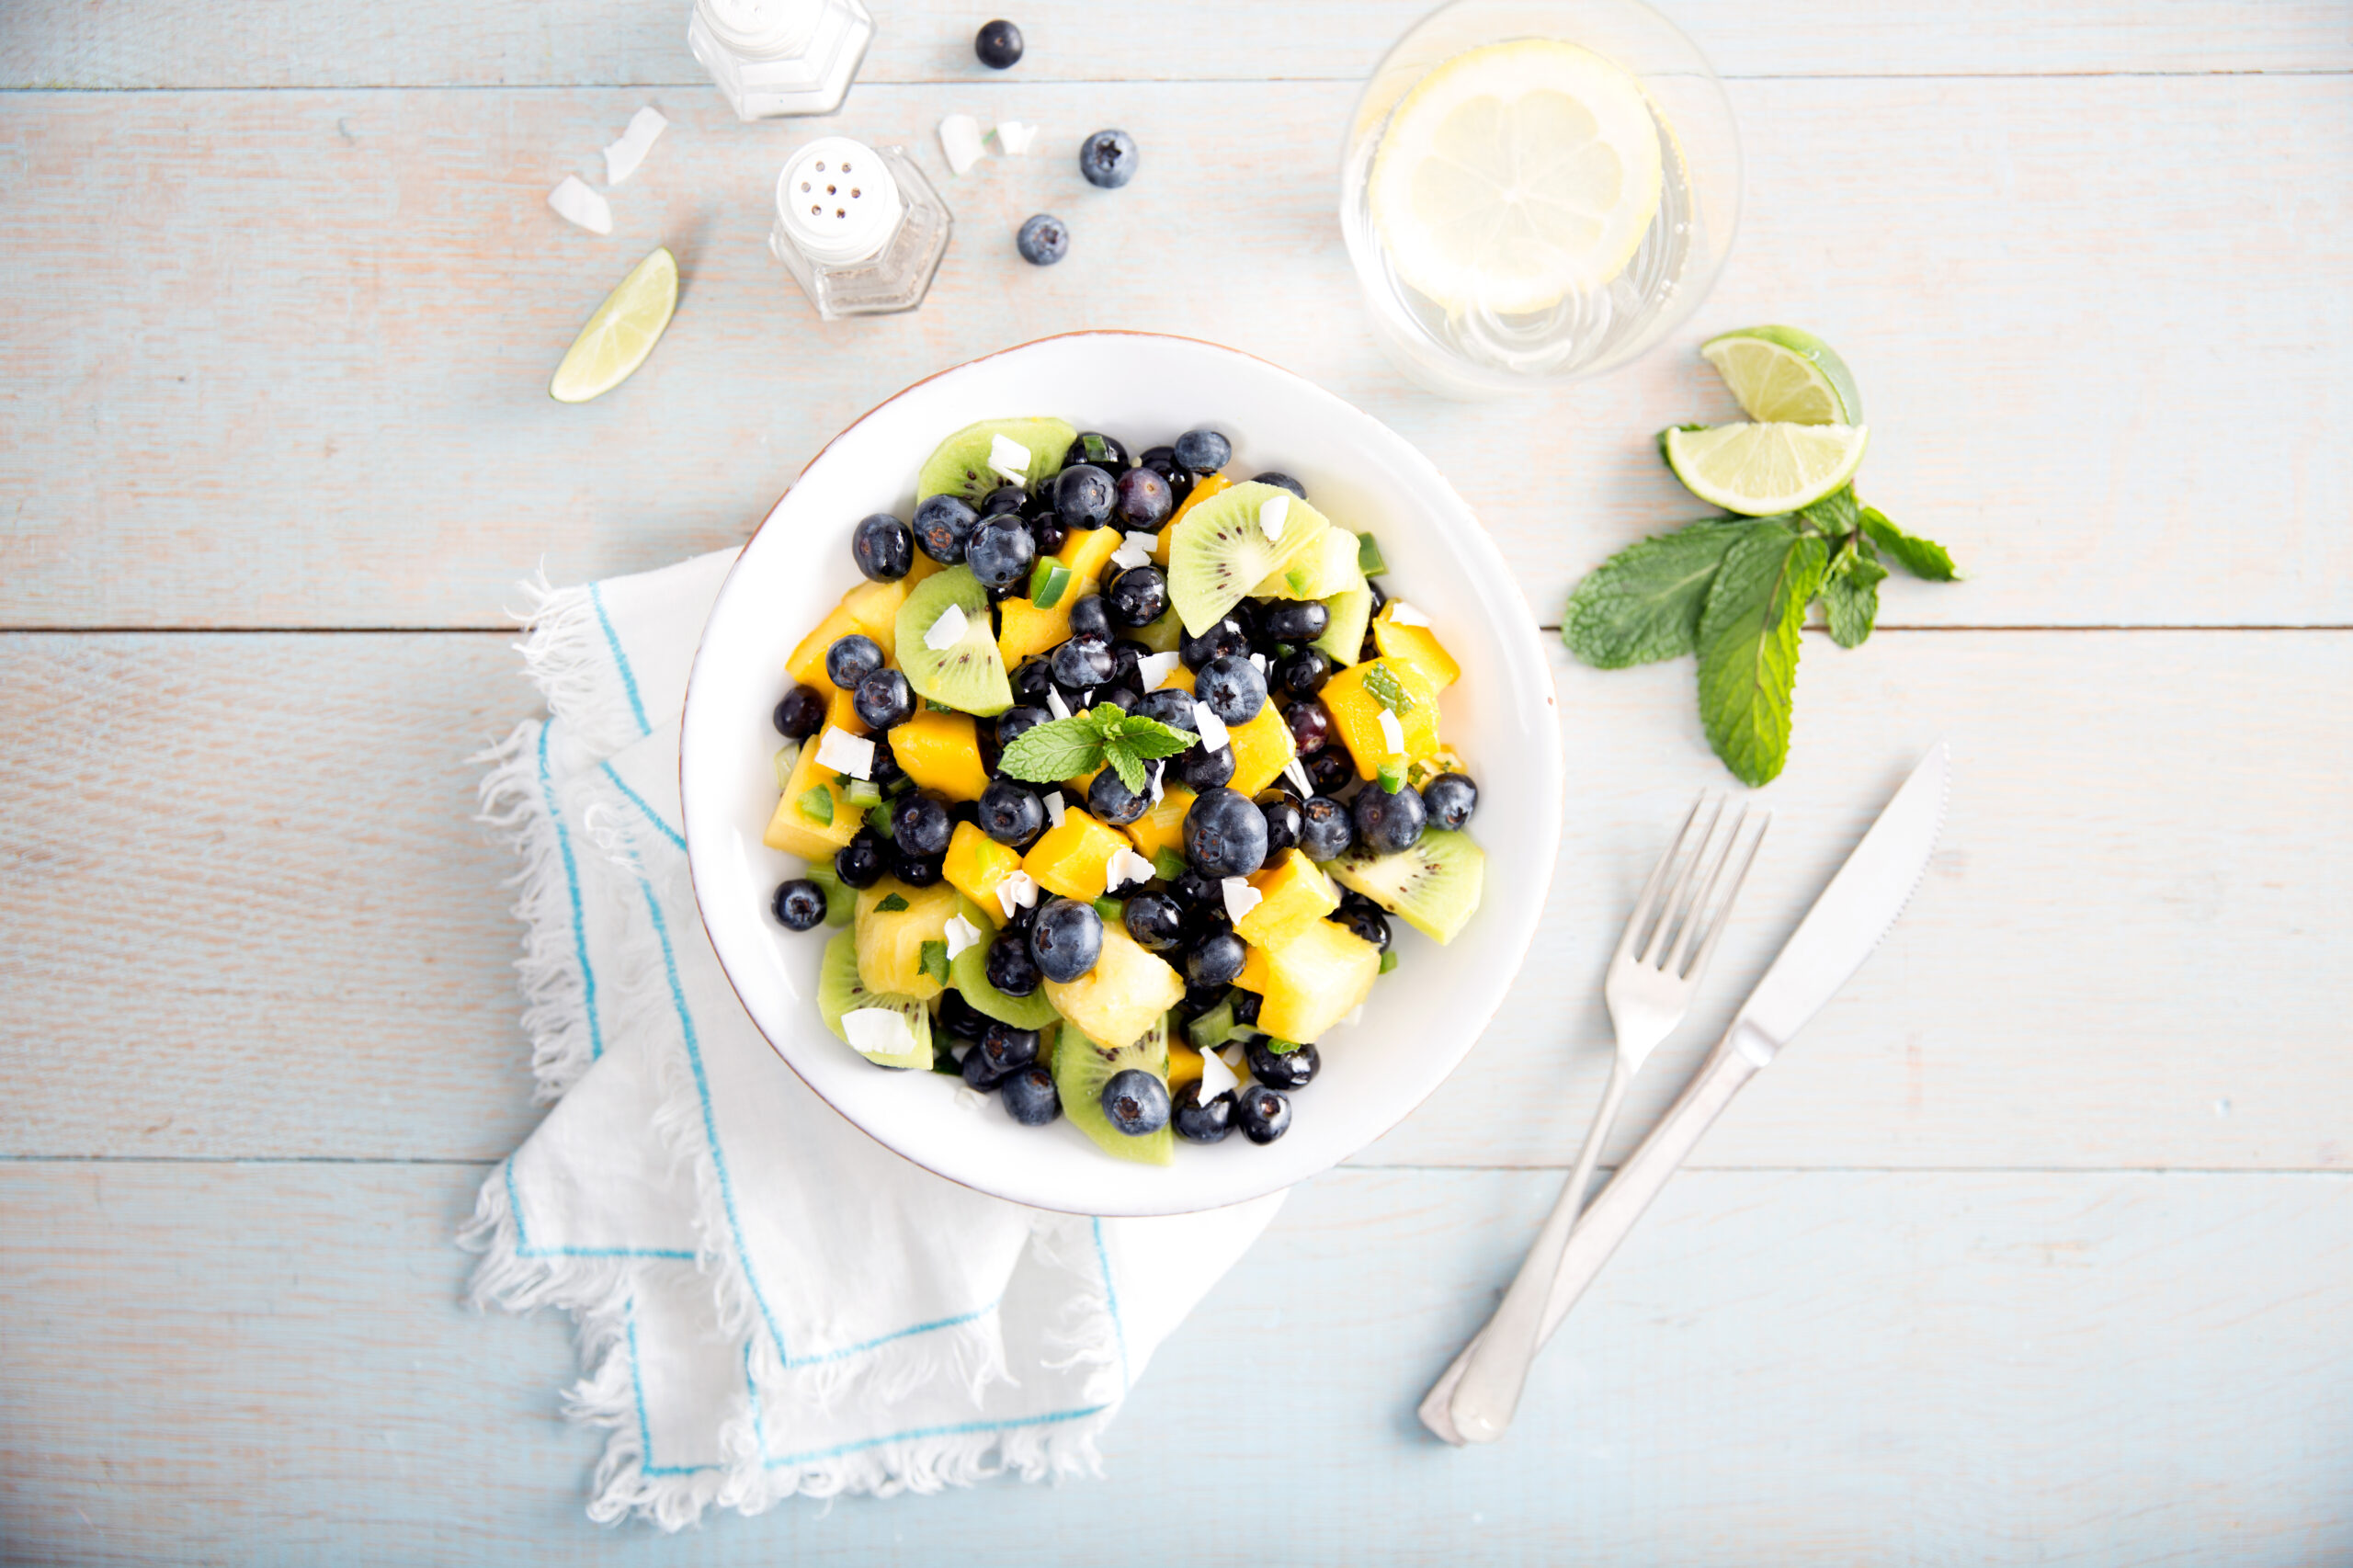 Recipe Image - Summer Fruit Salad with Jalapeno Mint and Lime